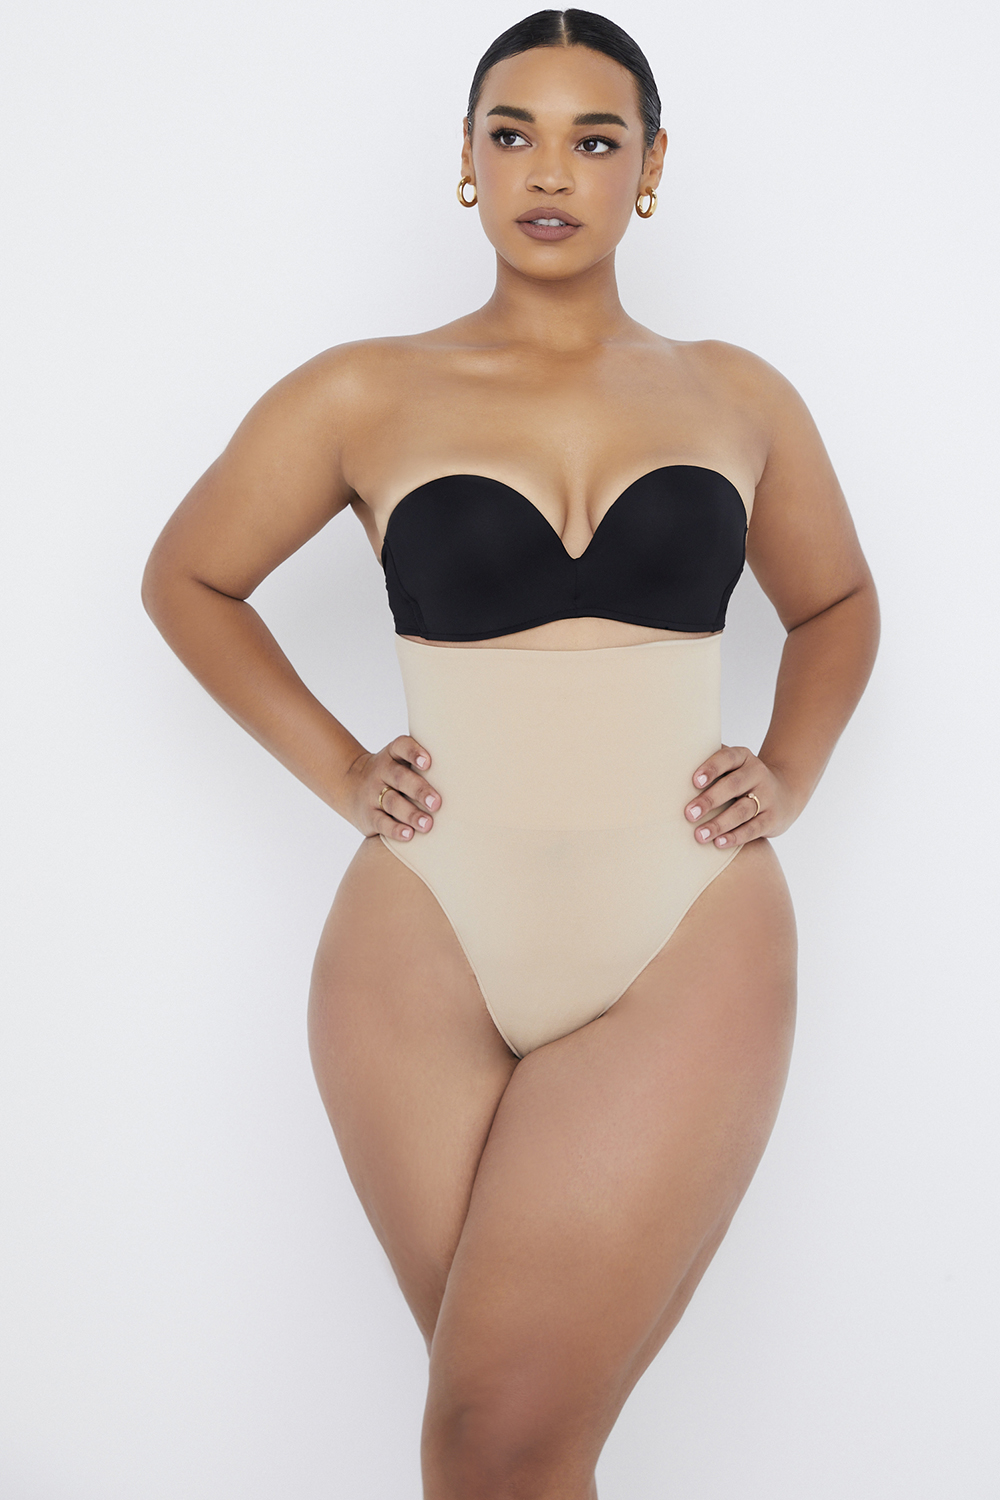 Hause of J'mone's High Waist Thong Body Shaper - Smooth and Sculpt